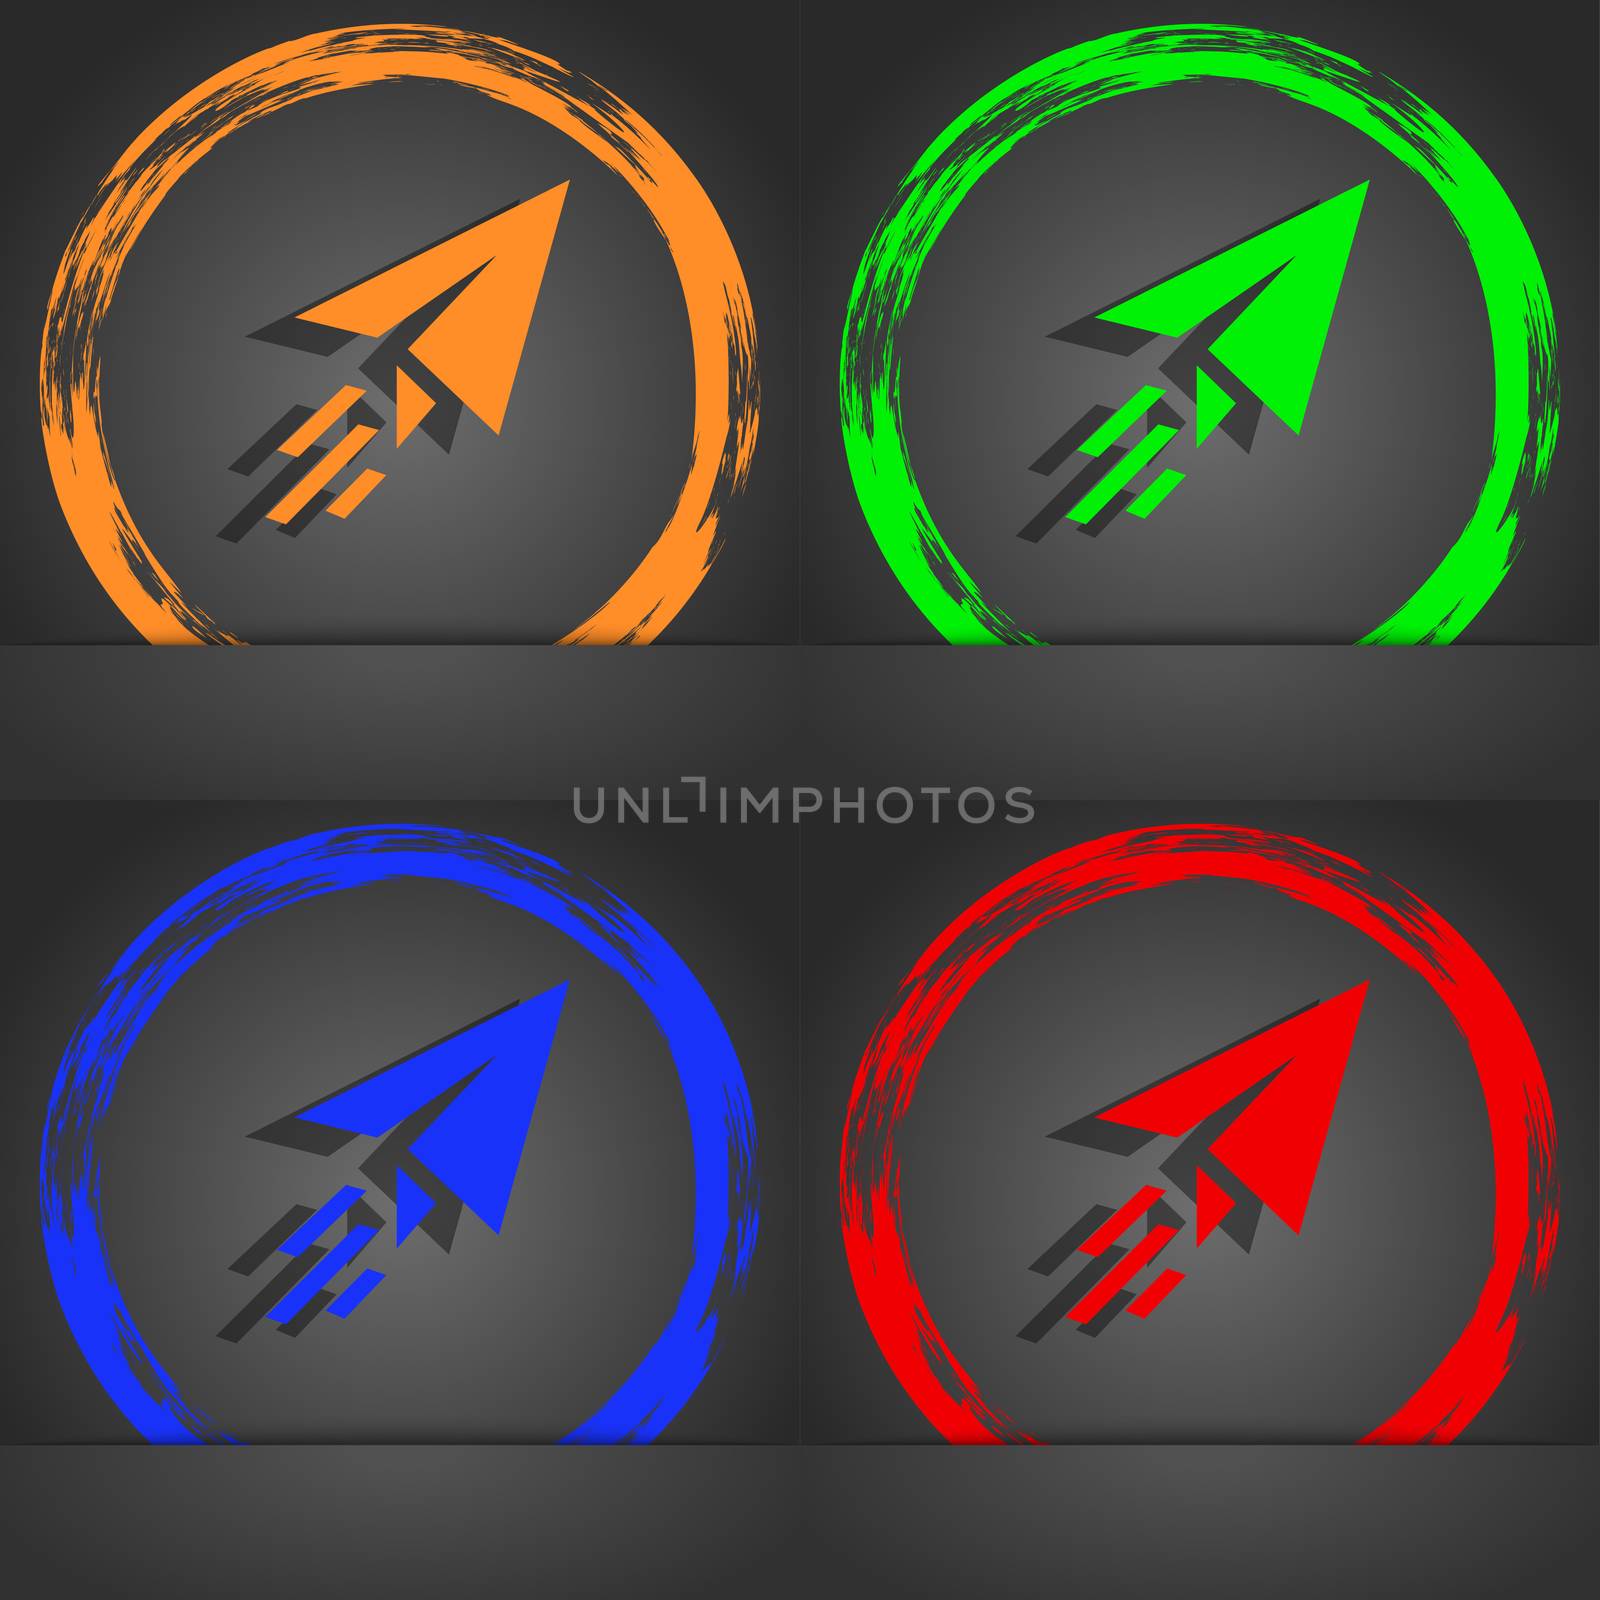 Paper airplane icon symbol. Fashionable modern style. In the orange, green, blue, green design. illustration